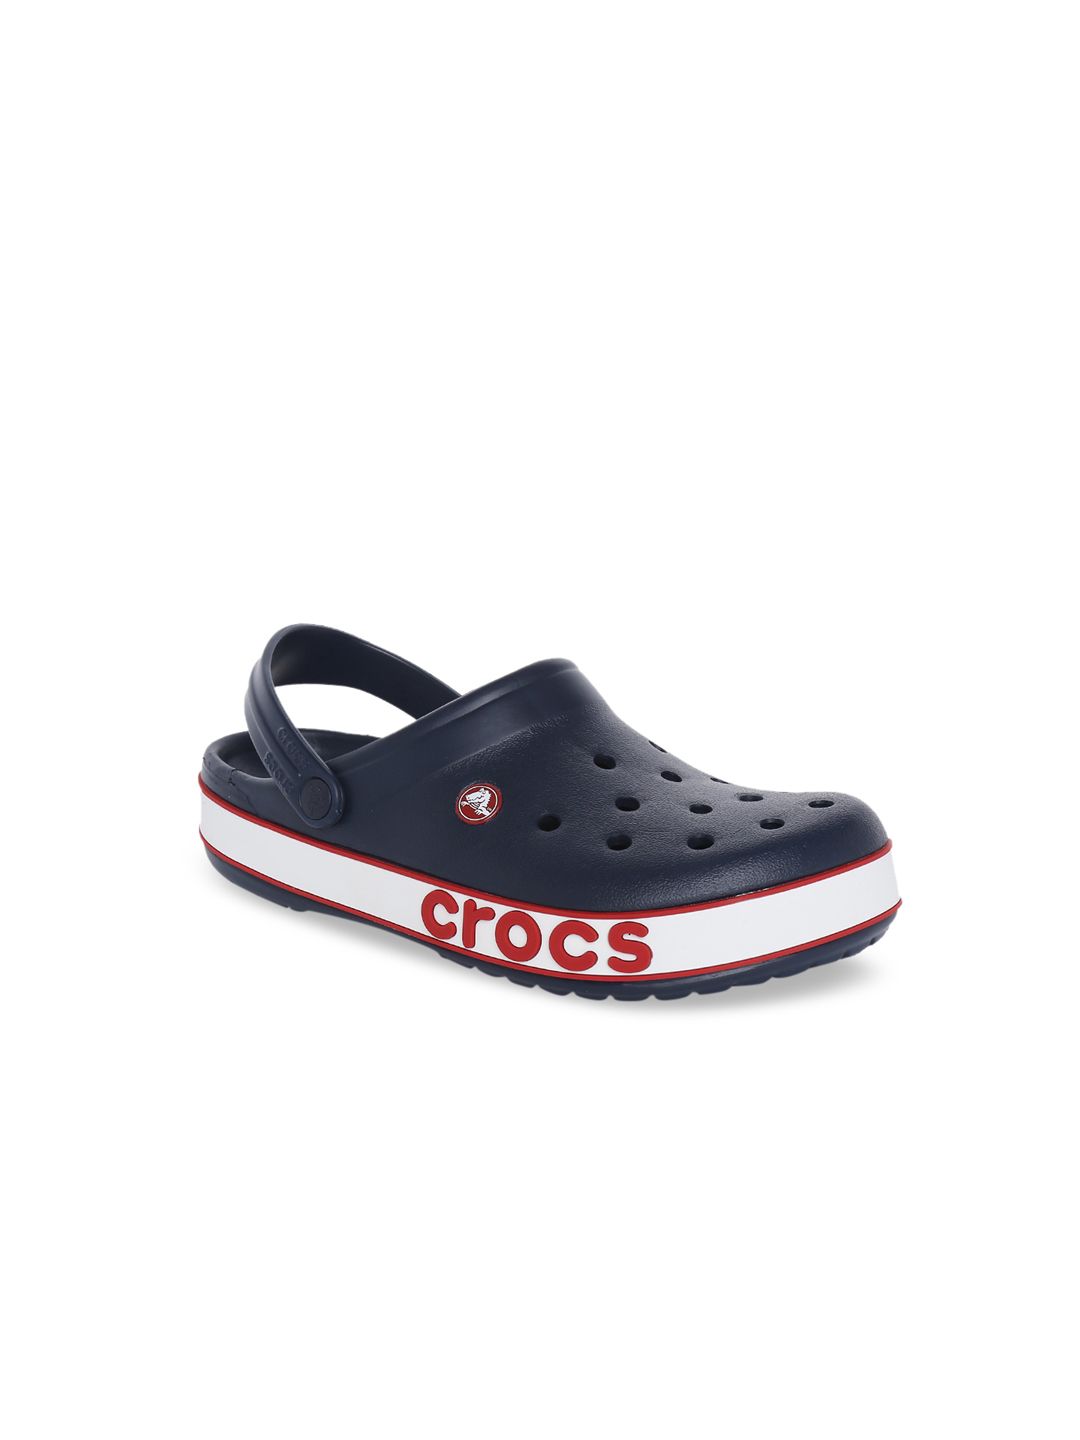 Crocs Crocband Unisex Navy Blue Clogs with Cut-Outs Price in India